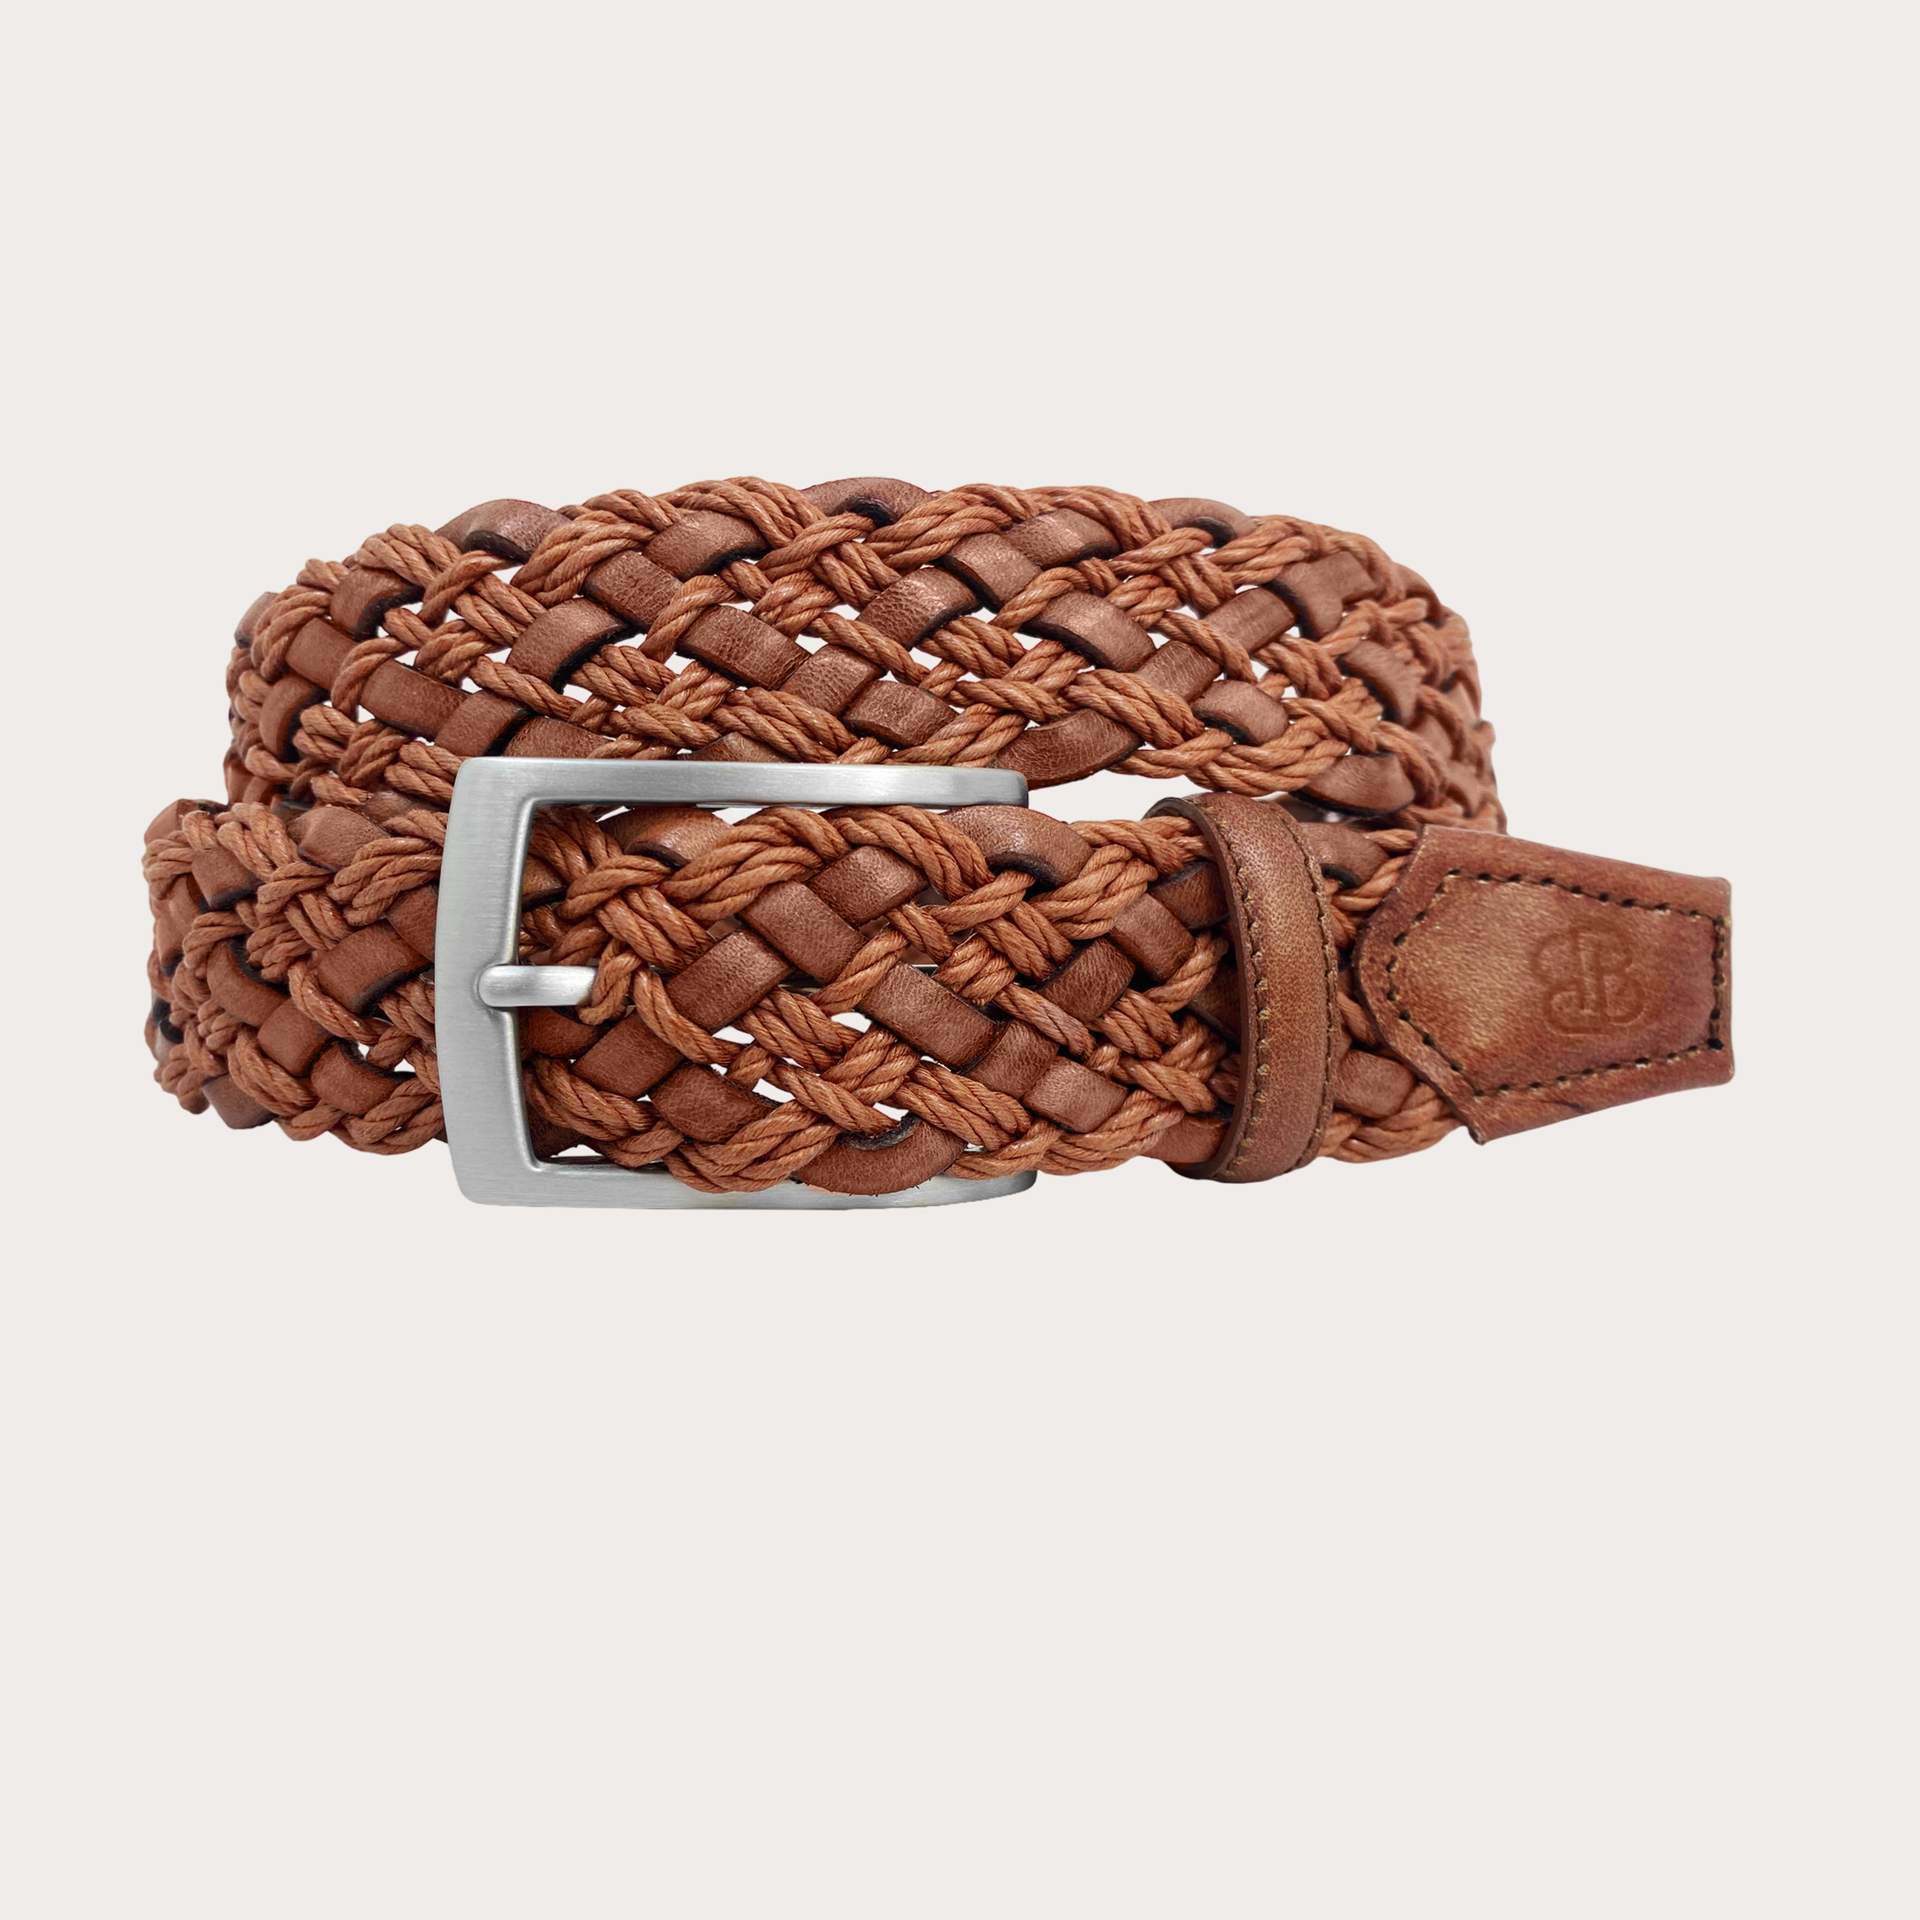 Braided Leather Belt Belts Vintage Leather Goods Woven Basketweave Woven  Cotton Canvas Brown White Red Black Mens Women's Belts -  Canada